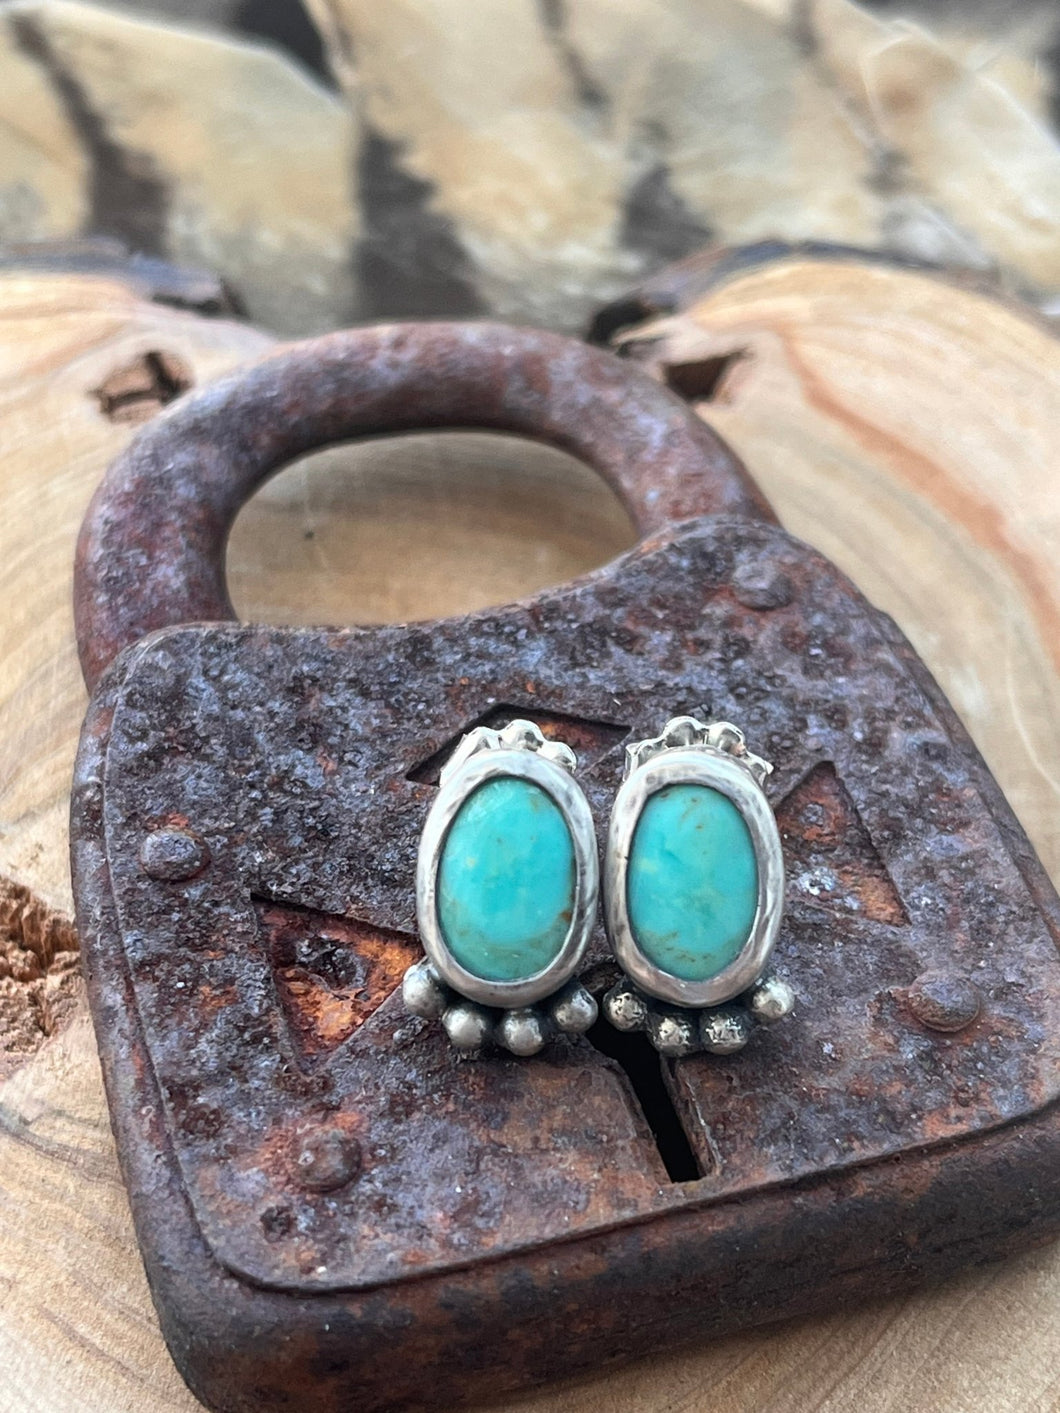 Oval blue green turquoise cabochons set in sterling silver accented with silver balls,  The posts on these stud earrings are sterling silver and the ear nuts are sterling silver.  These stud earrings are handmade by Taylor Made Silver.